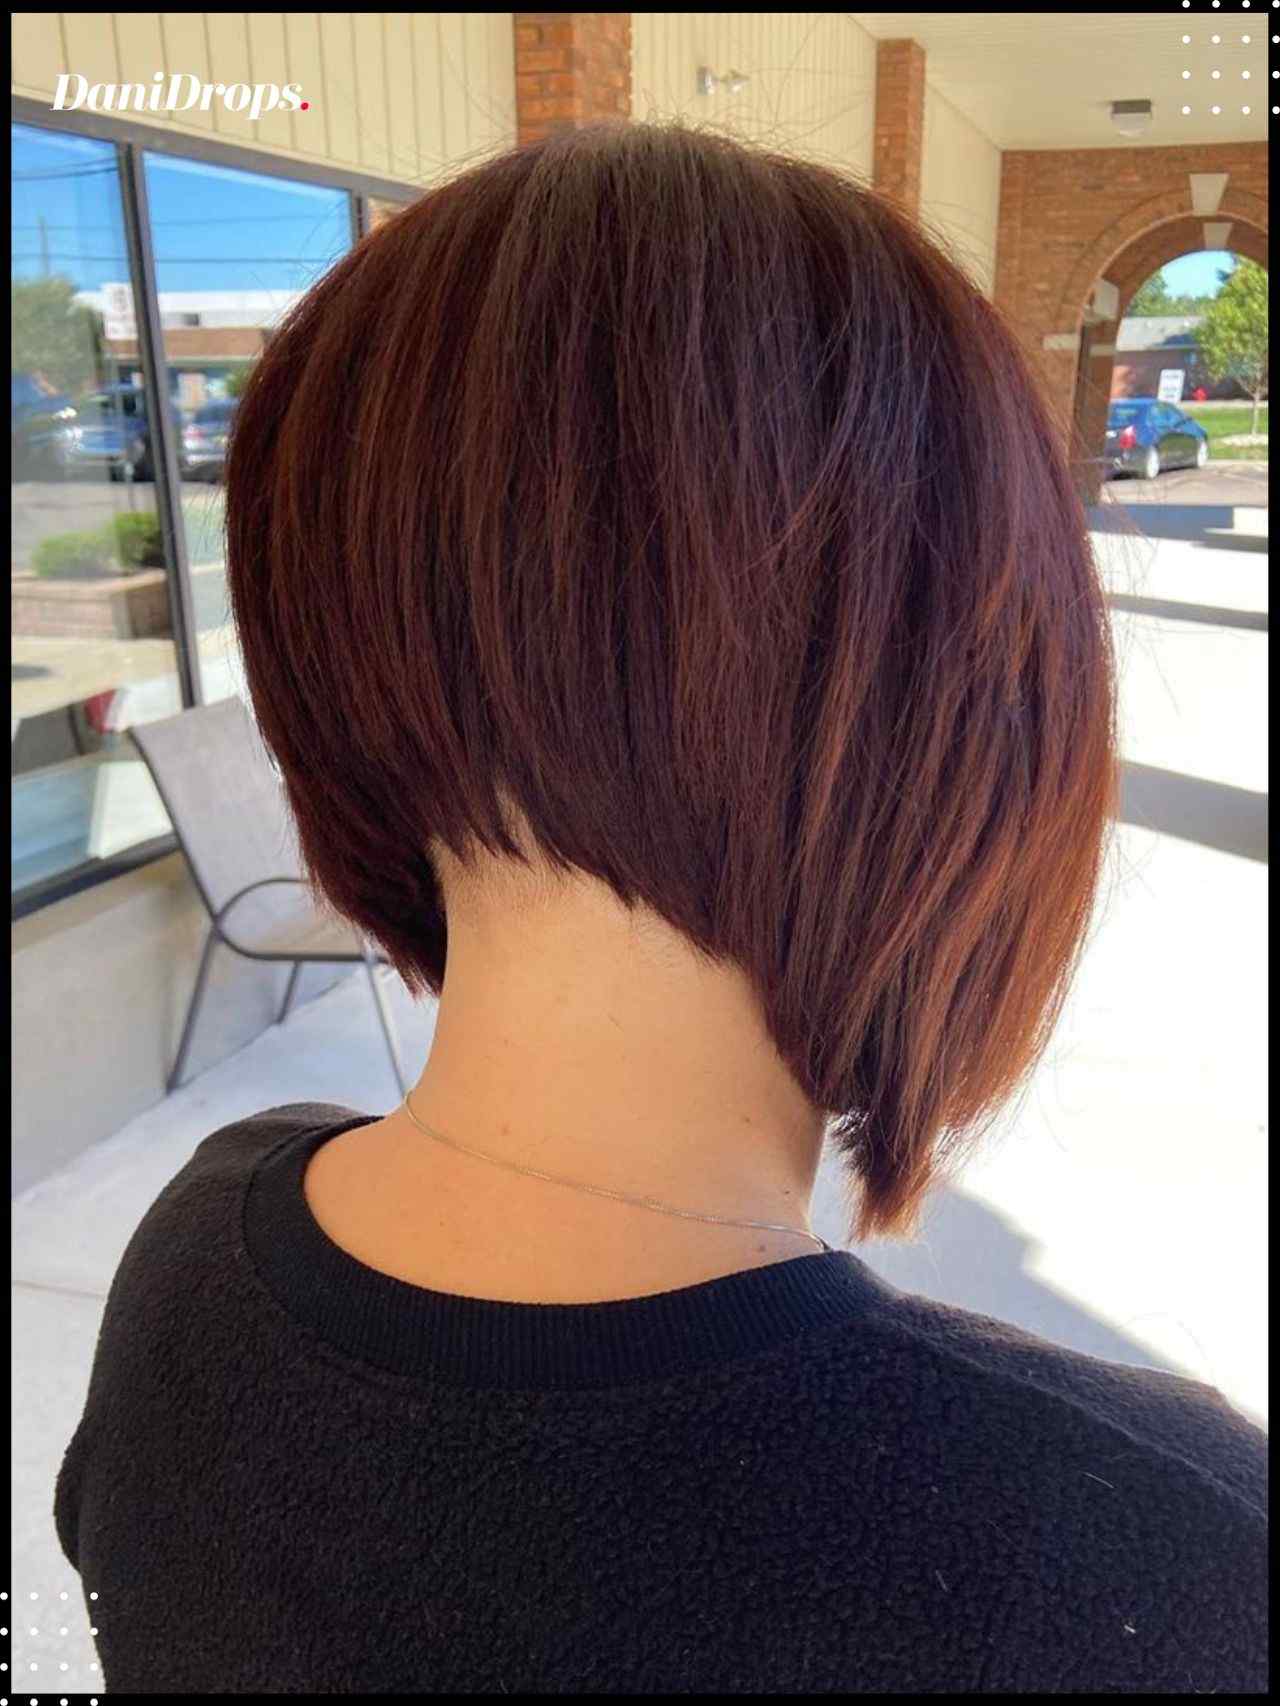 Back View of Bob Hairstyles | Bob-Hairstyle.Com | Short bob hairstyles, Bob  hairstyles, Bobs haircuts